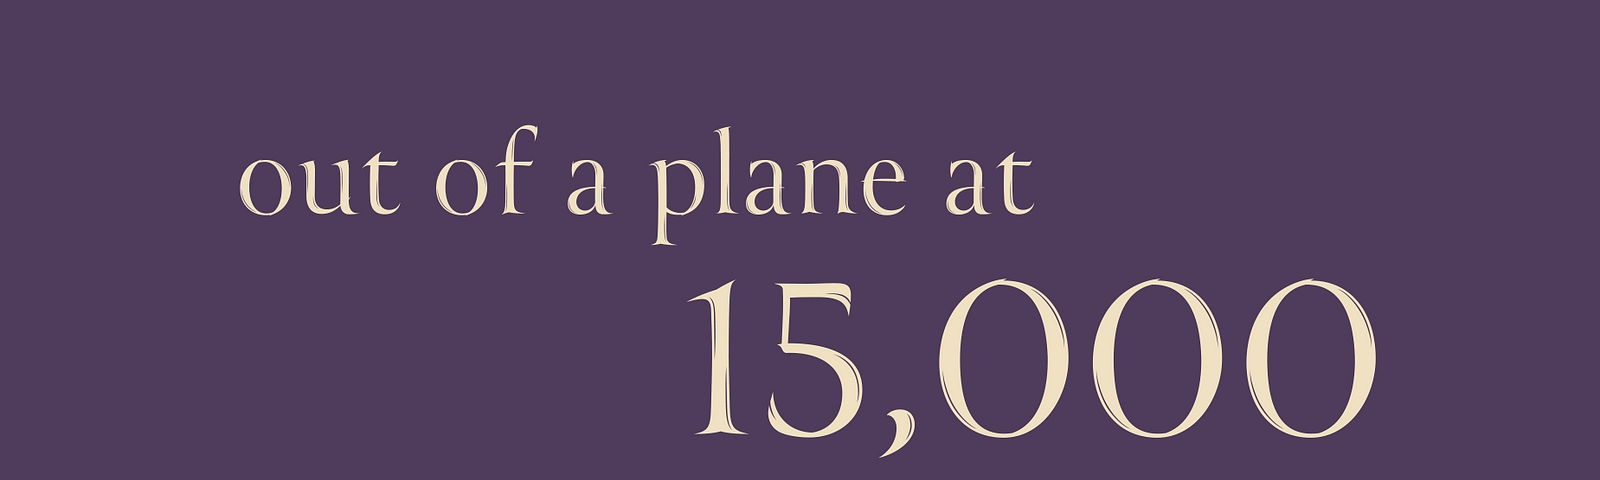 sand colored letters on a purple background read: “out of a plane at 15,000” feet.